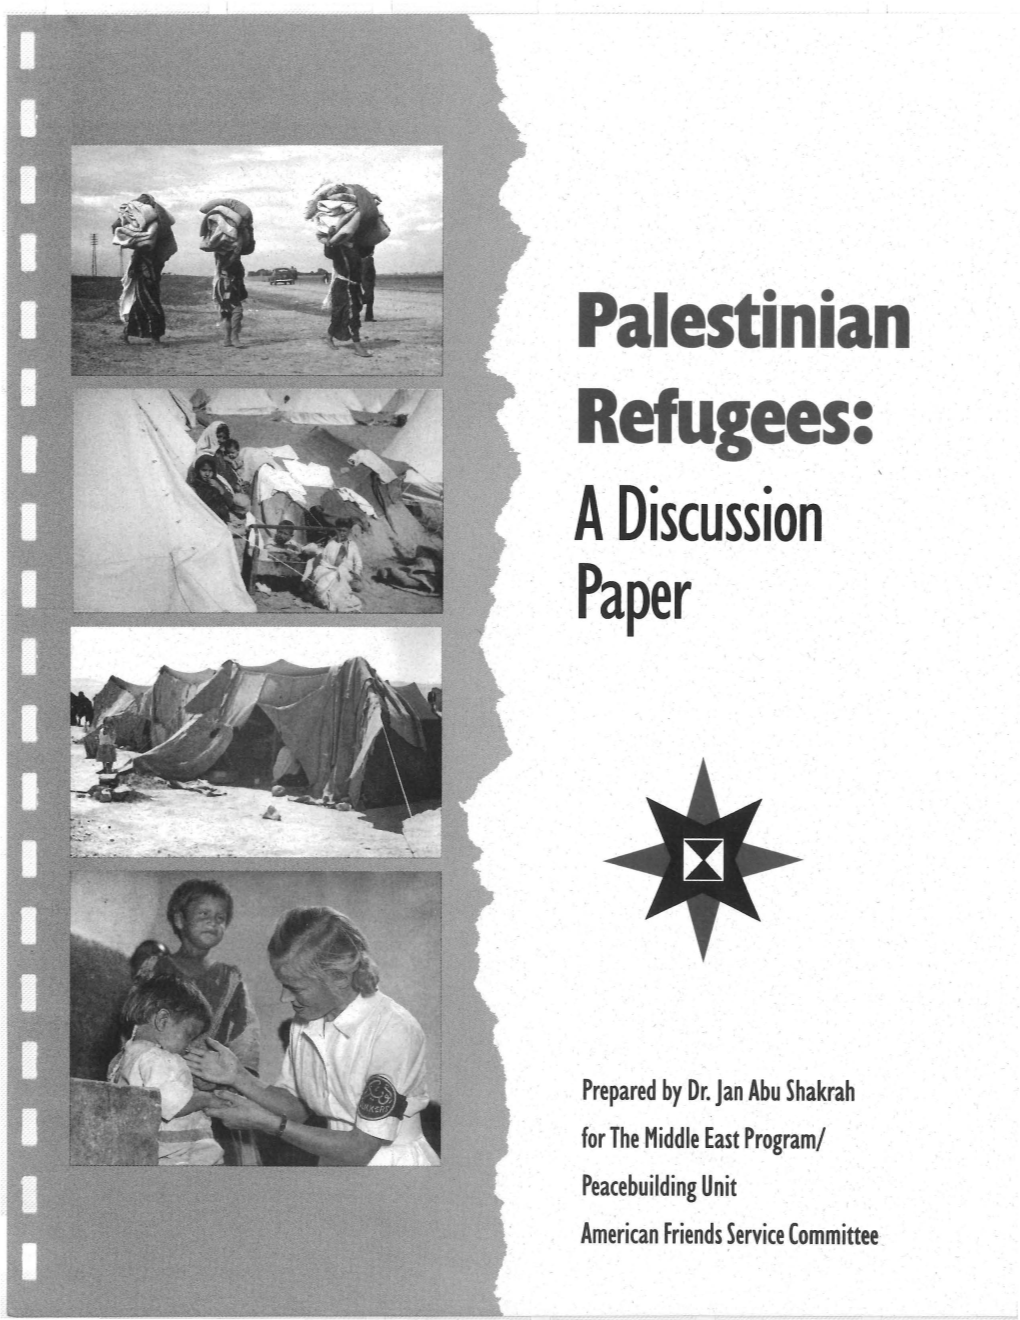 Palestinian Refugees: Adiscussion ·Paper